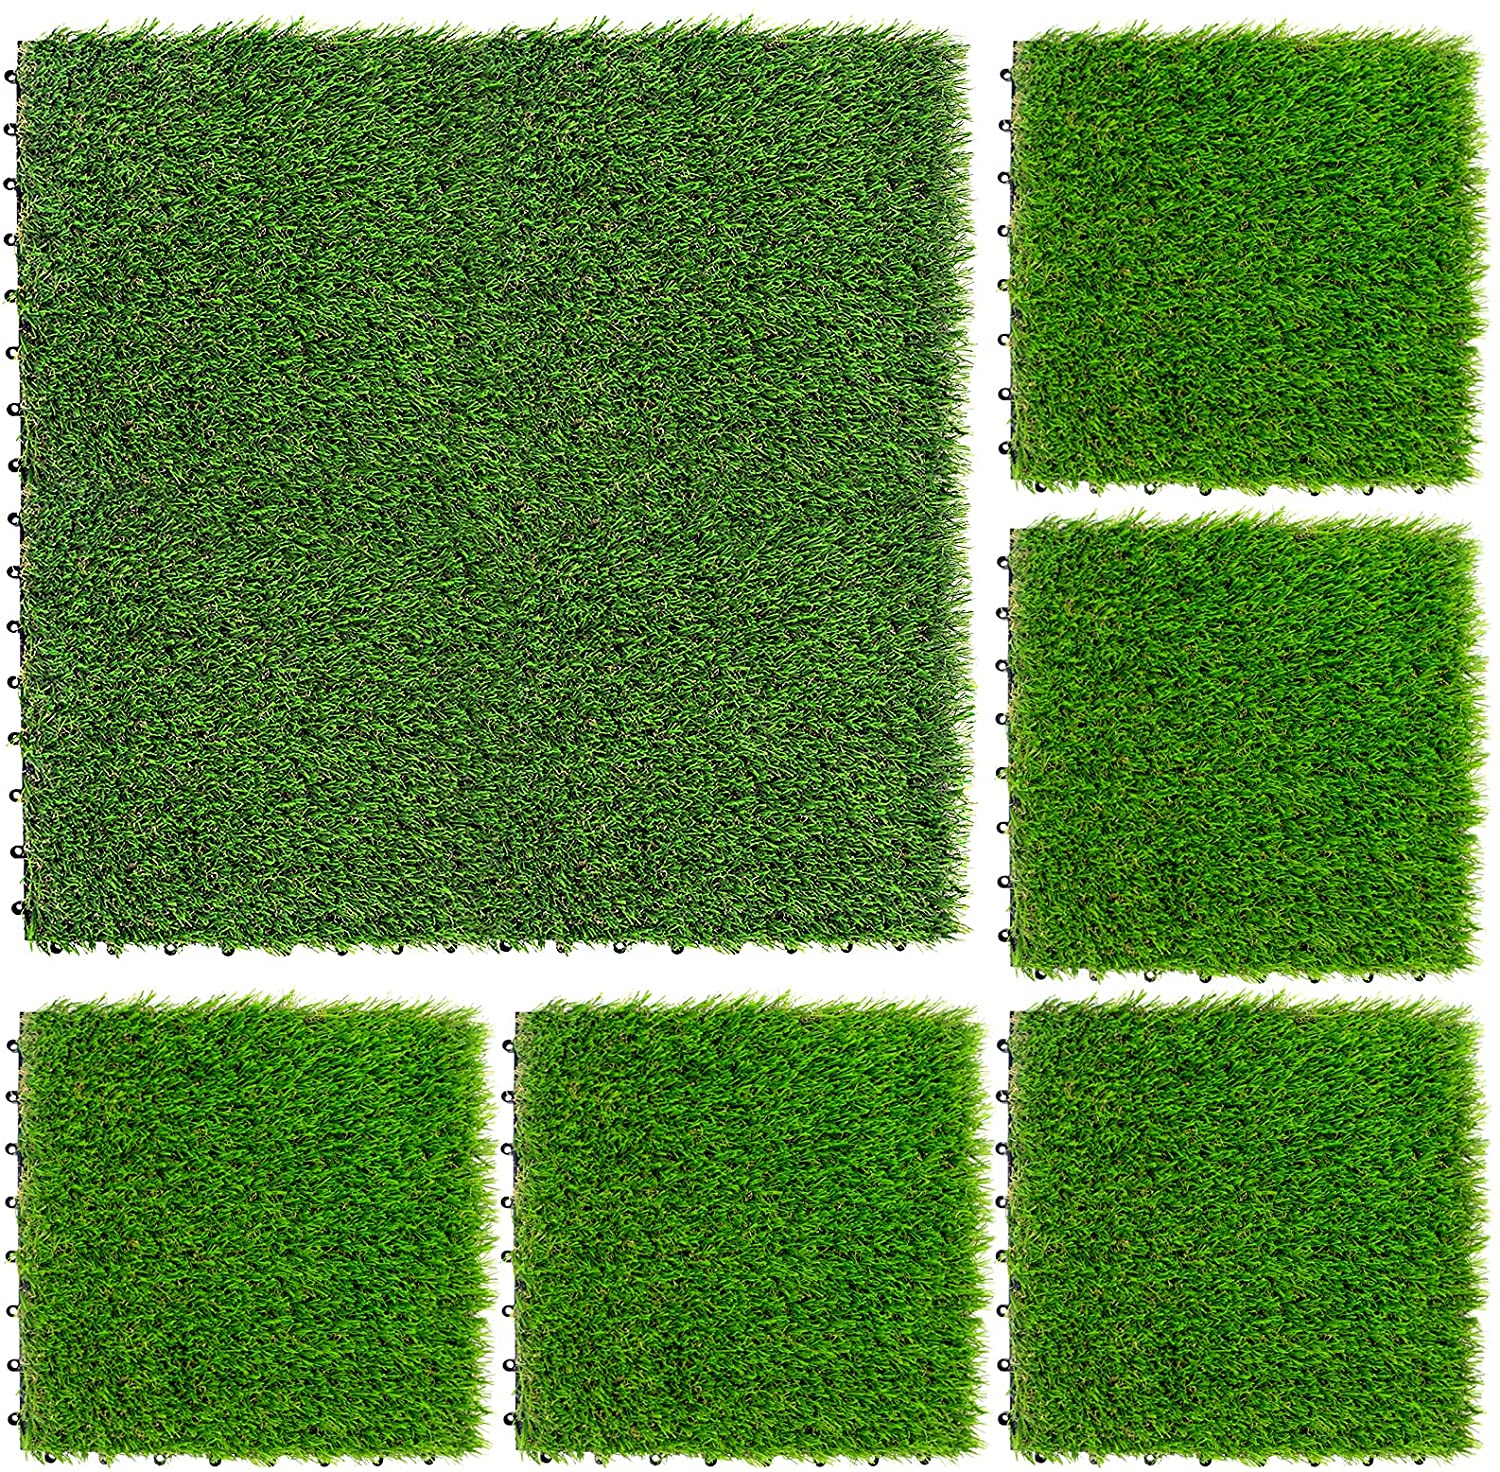 How to Install Artificial Grass on Rooftop: Only 5 Easy Steps